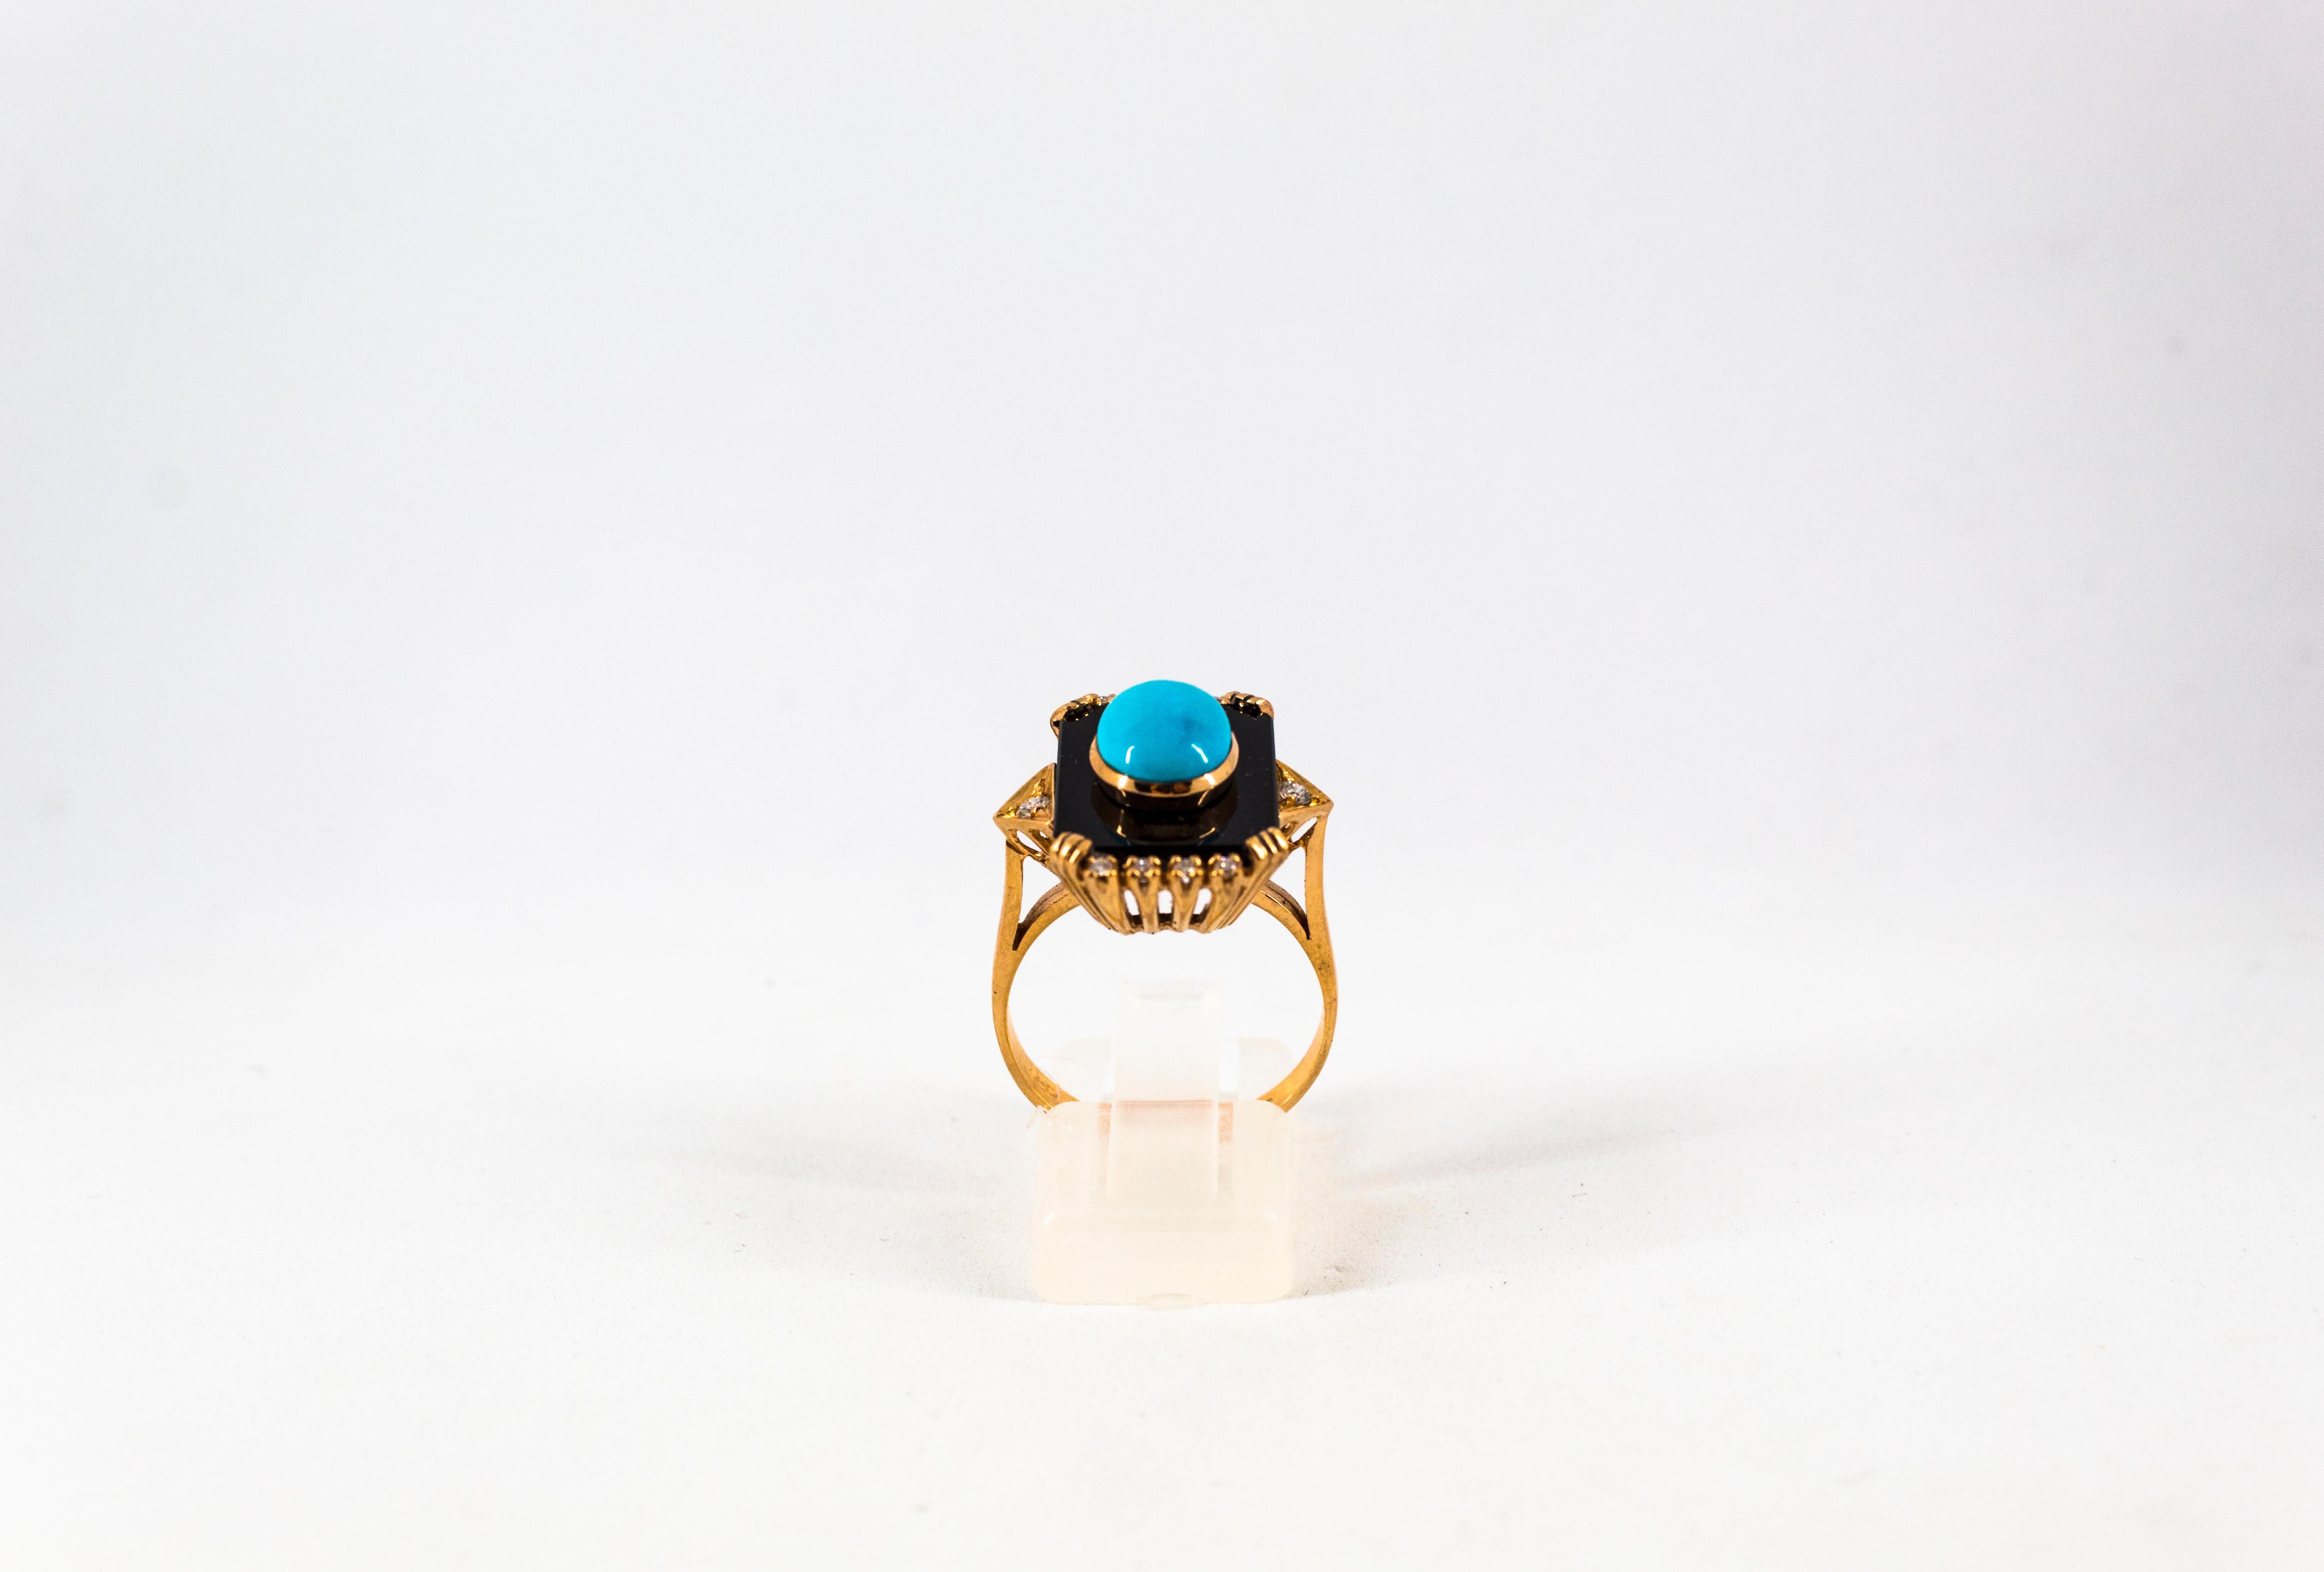 This Ring is made of 14K Yellow Gold.
This Ring has 0.18 Carats of White Diamonds.
This Ring has Turquoise.
This Ring has also Onyx.
Size ITA: 16 USA: 7 1/2
This Ring is available also with a central 2.10 Carats Ruby or with a central Mediterranean